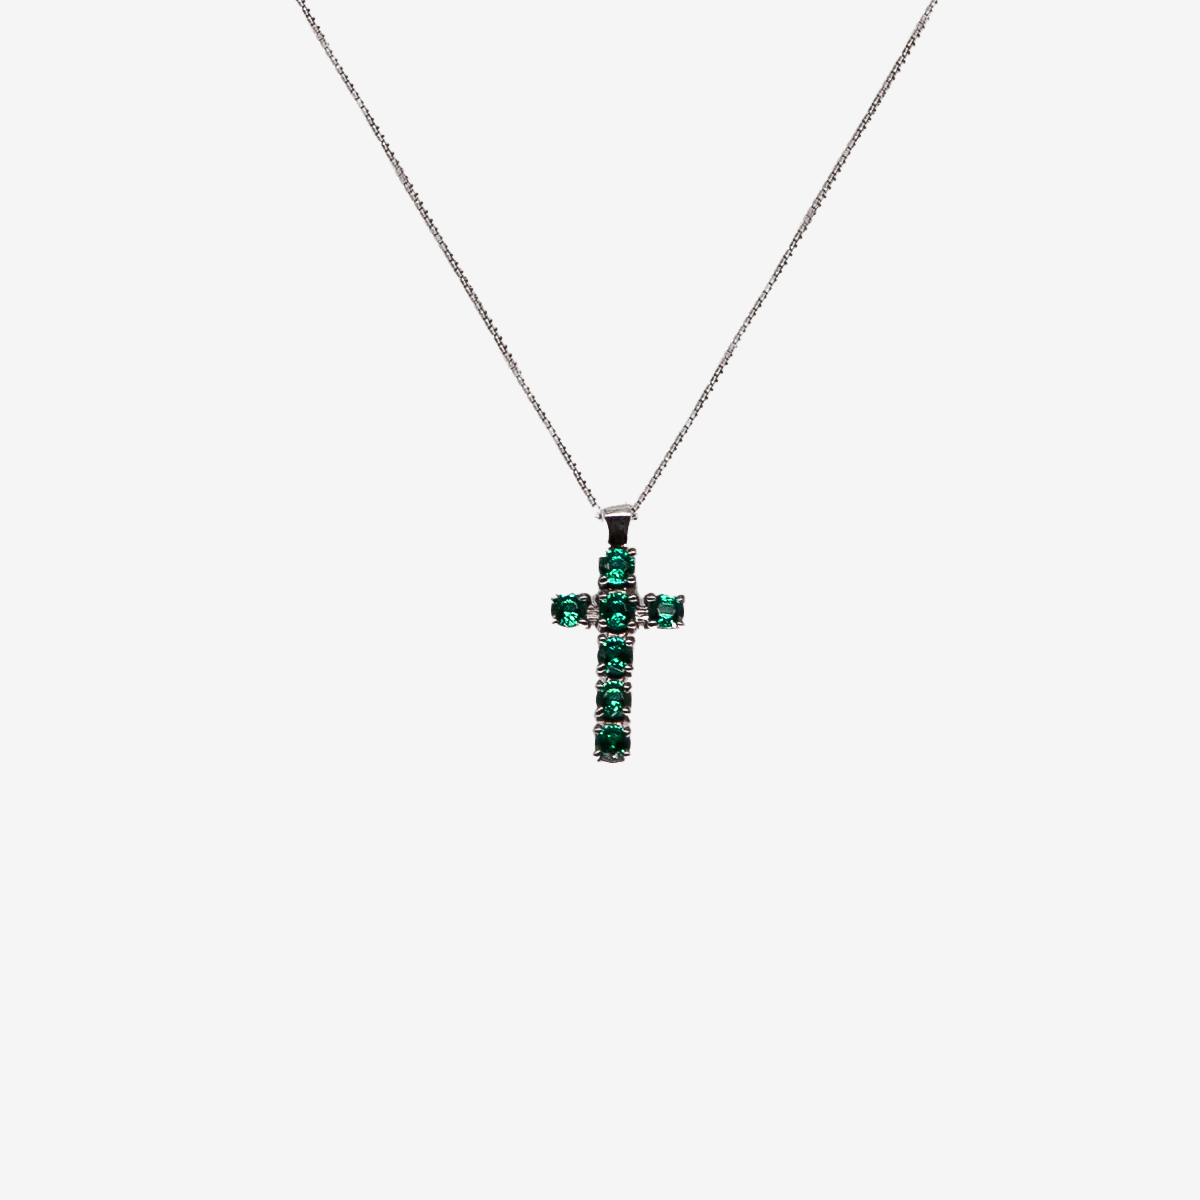 Cross necklace with emeralds